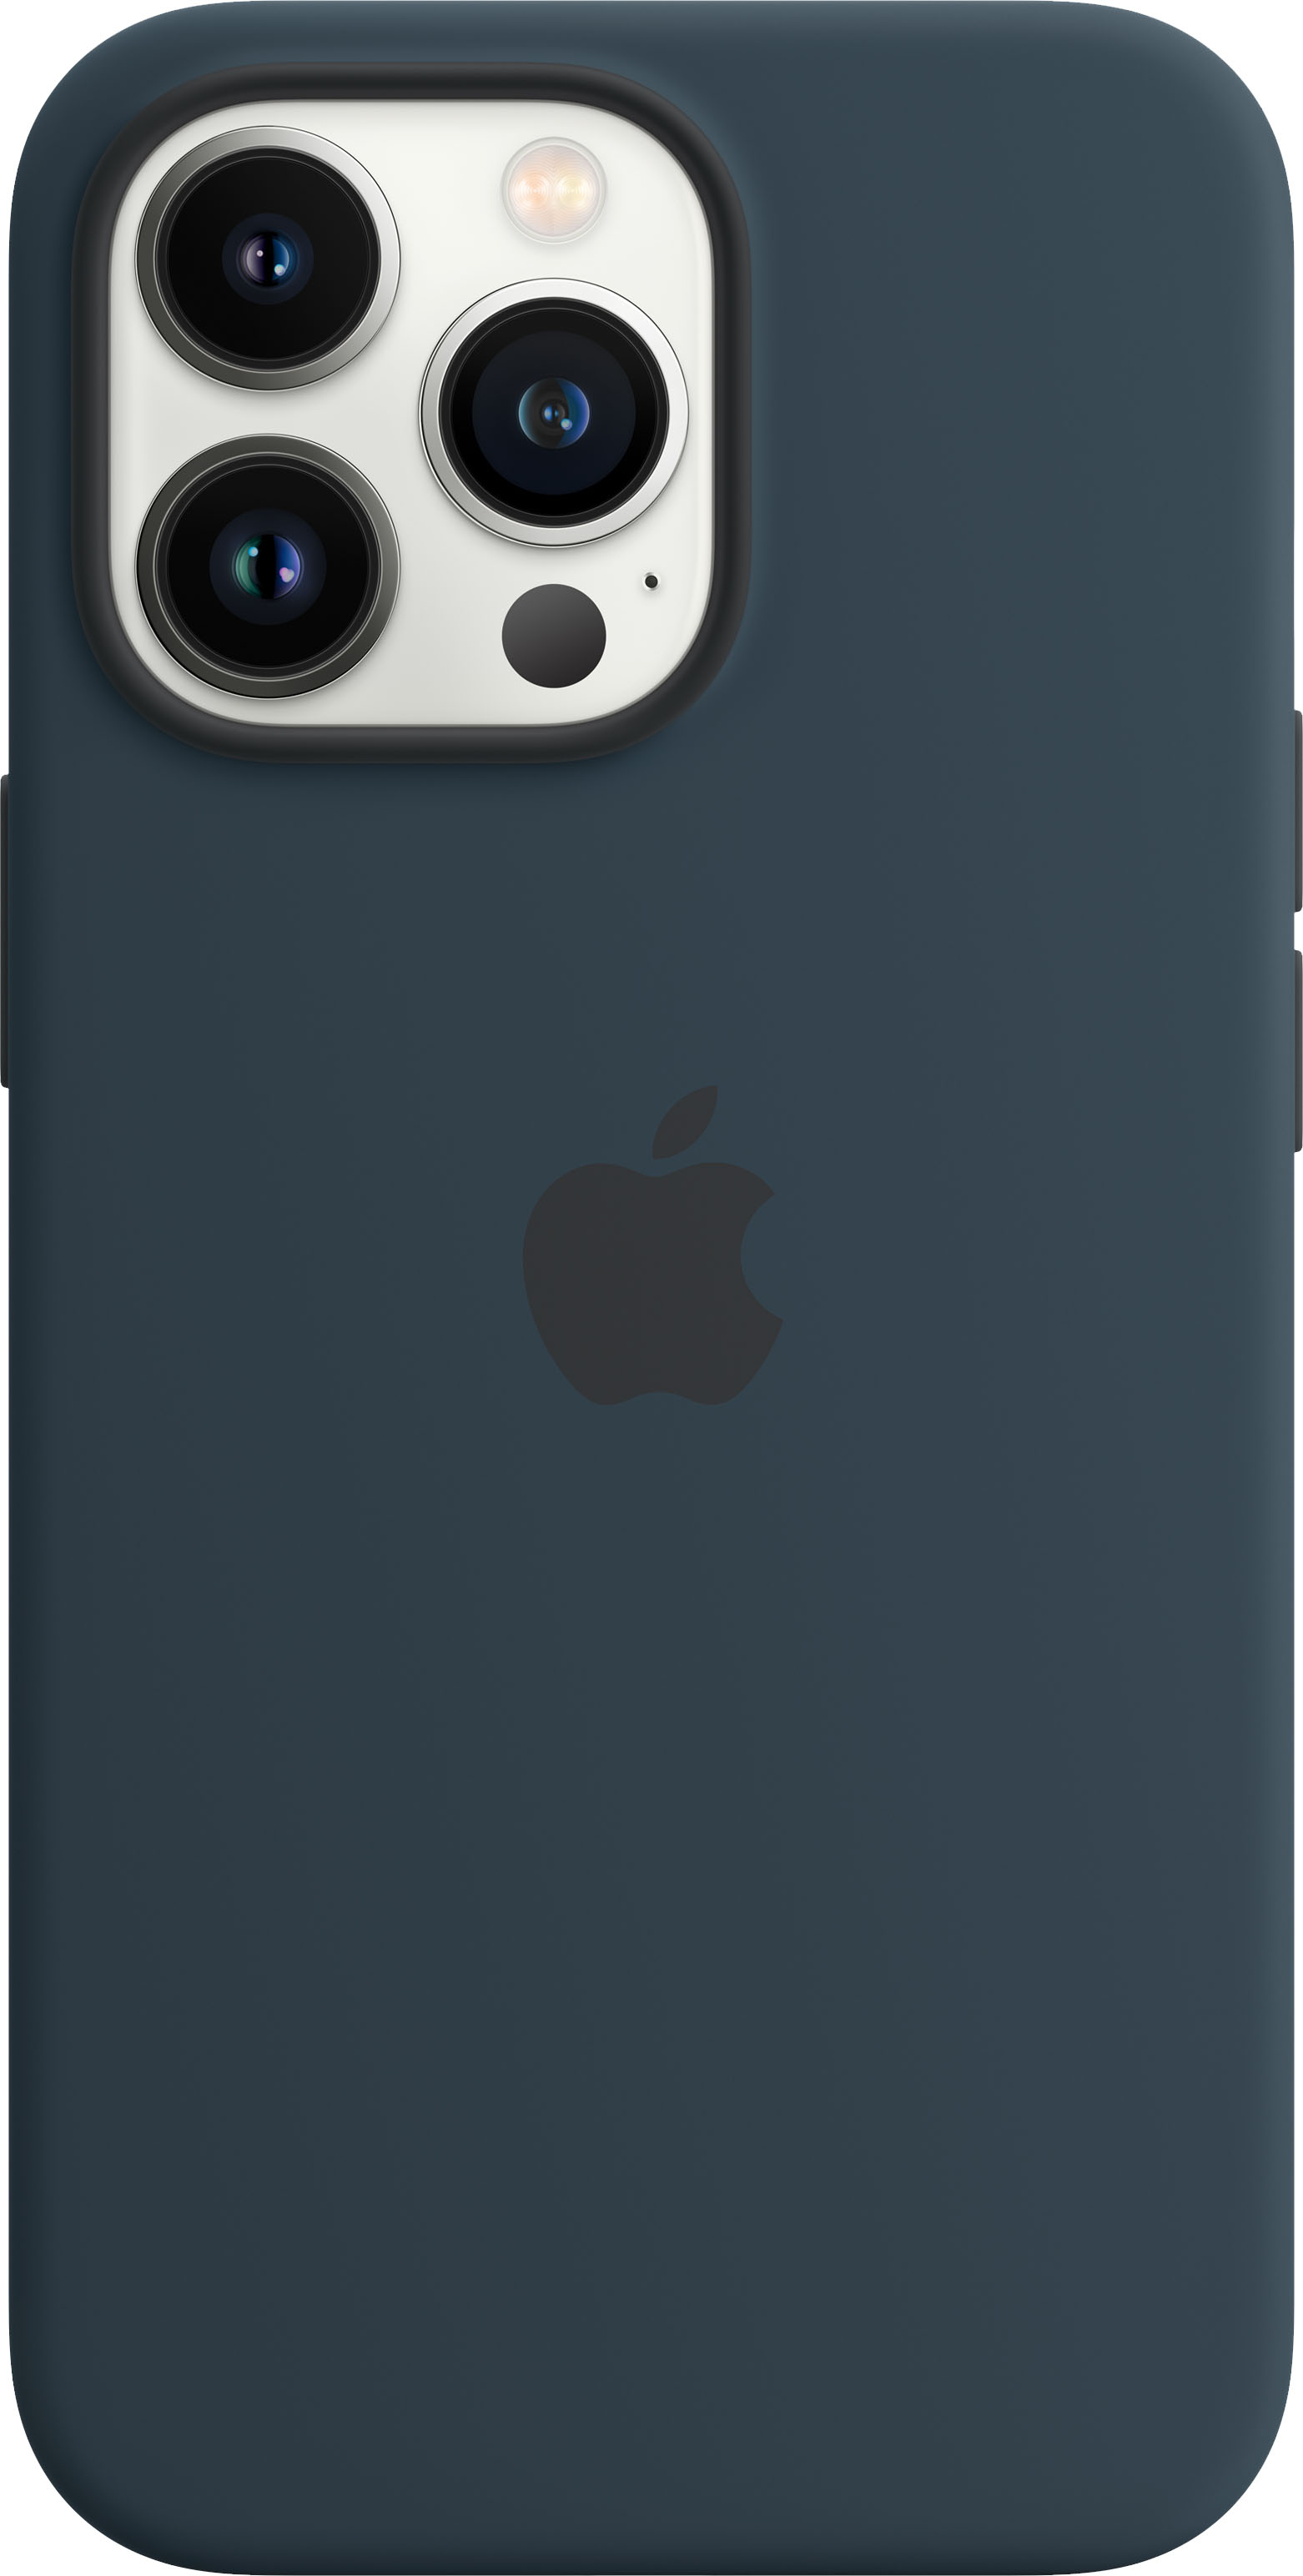 Cute Design Phone Cases For Your Sierra Blue iPhone 13 Pro & 13